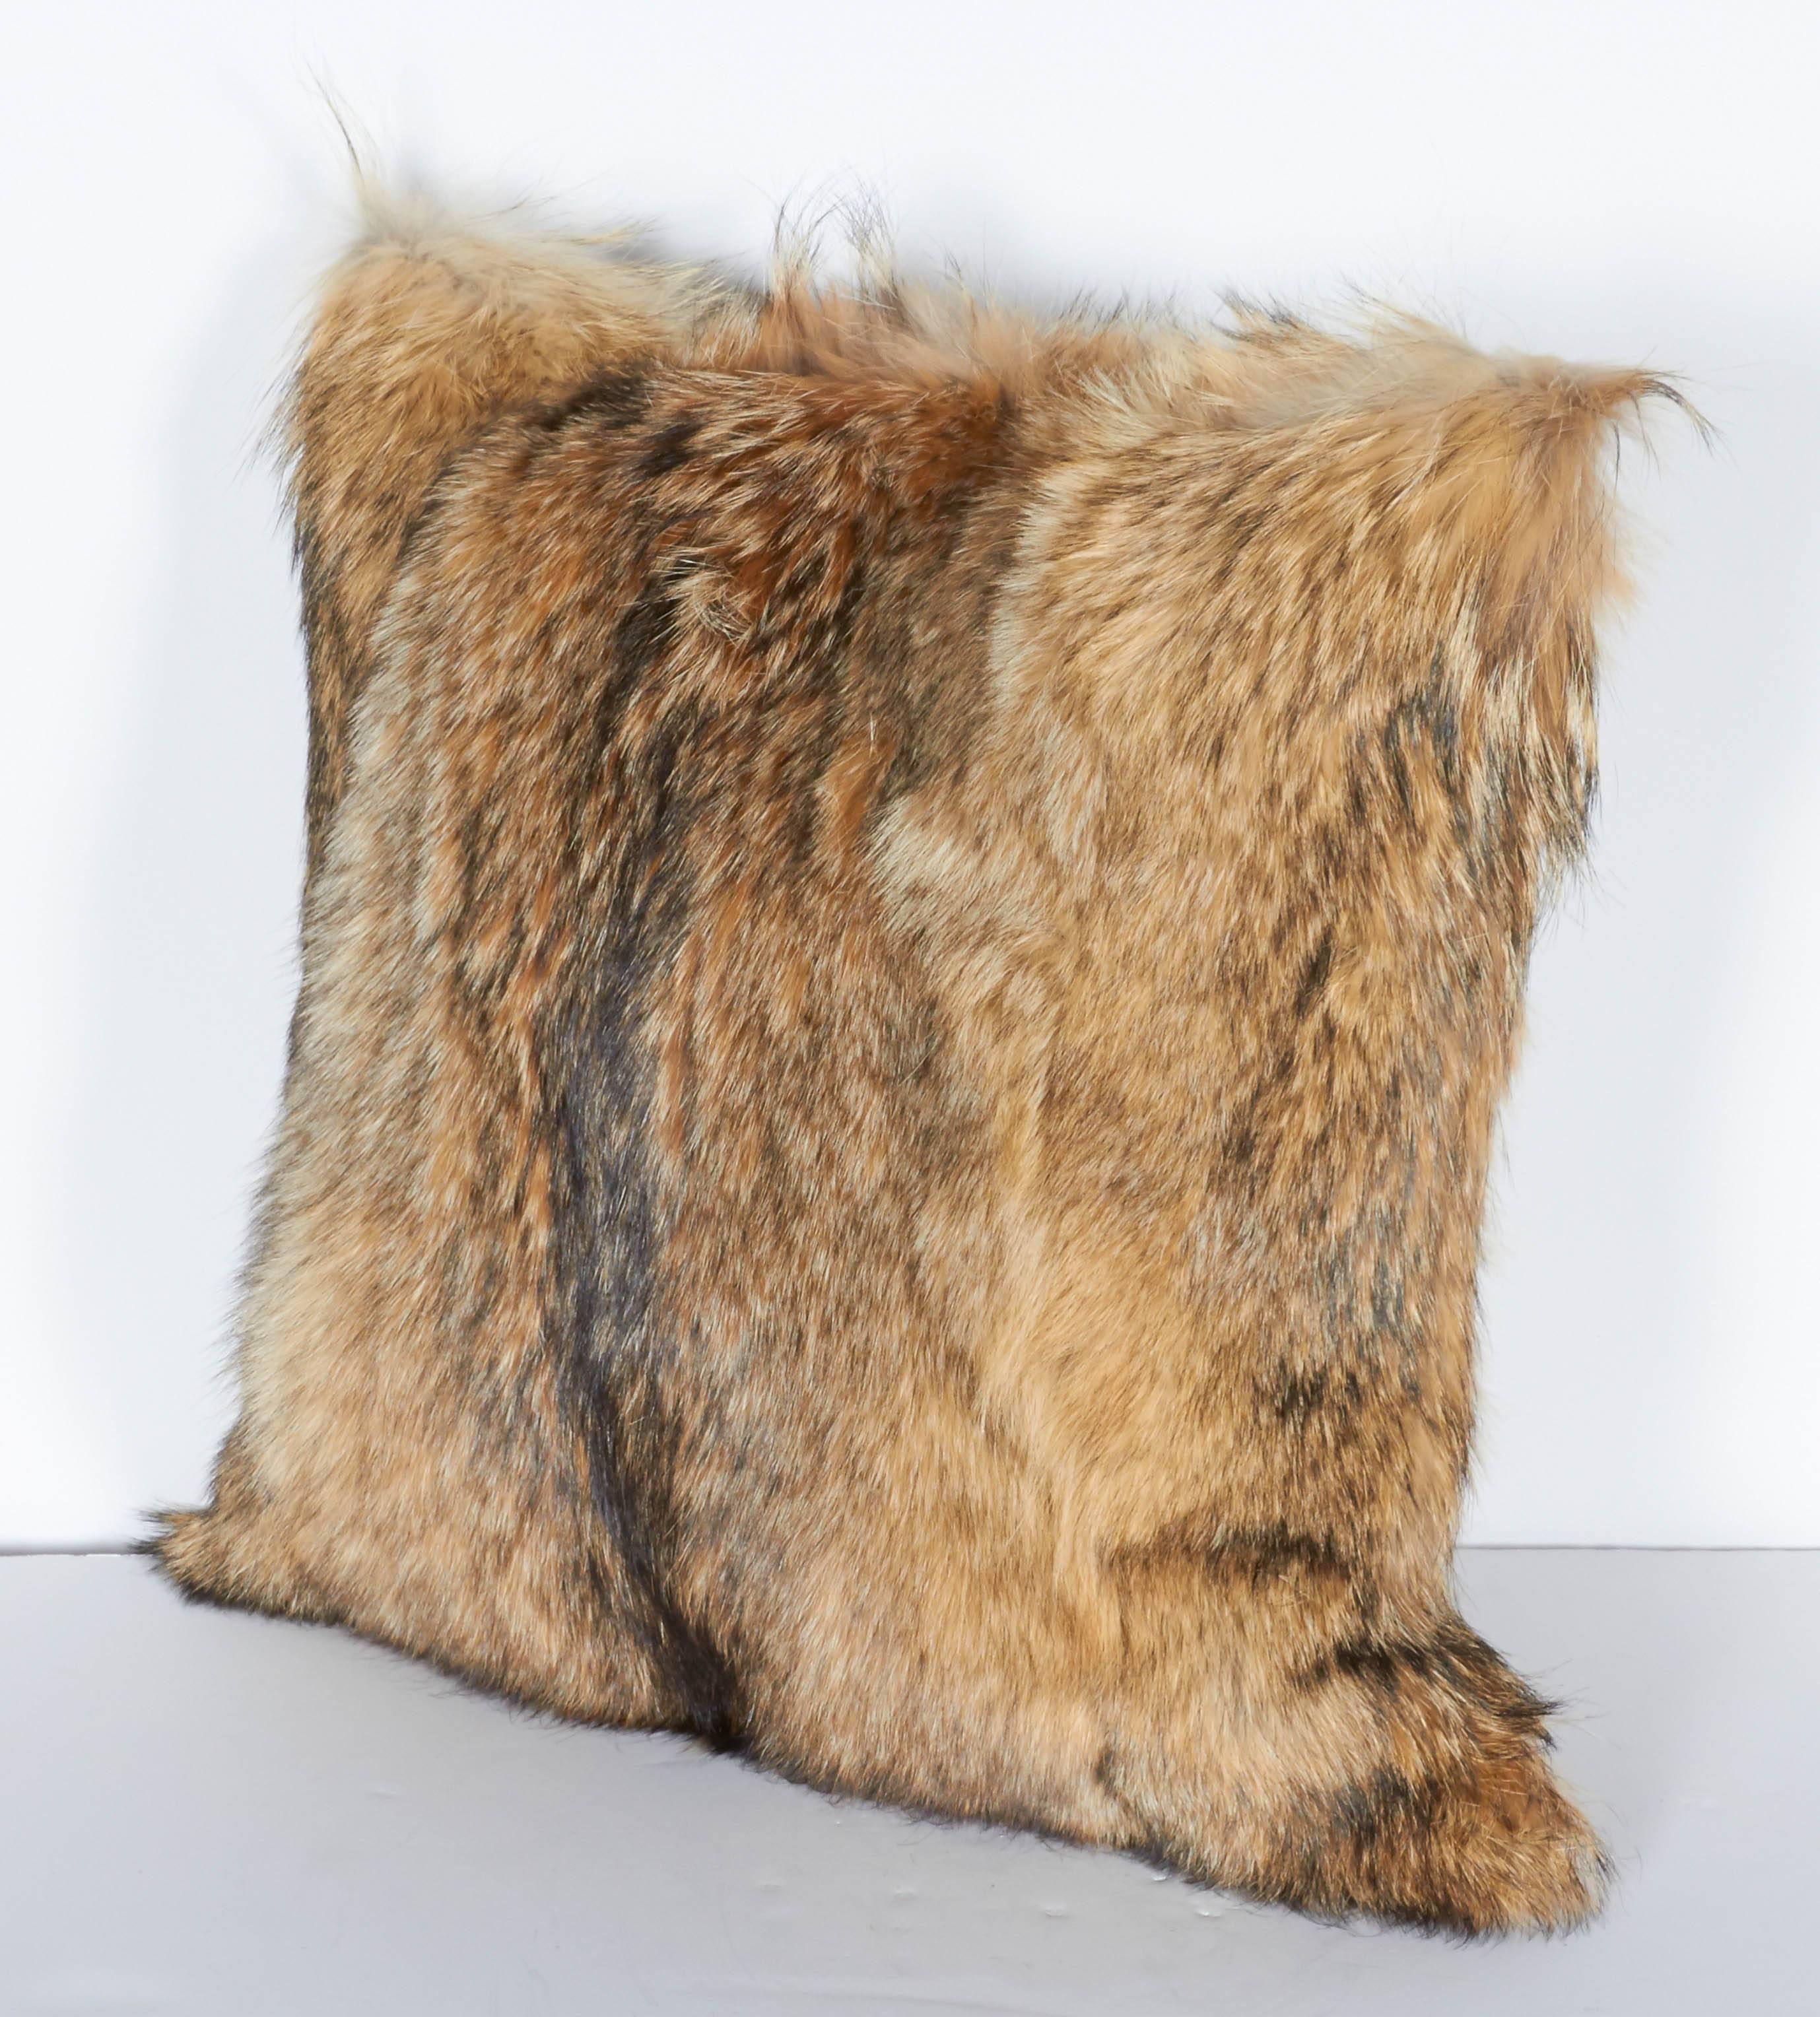 Hand-Crafted Luxury Coyote Fur Throw Pillows